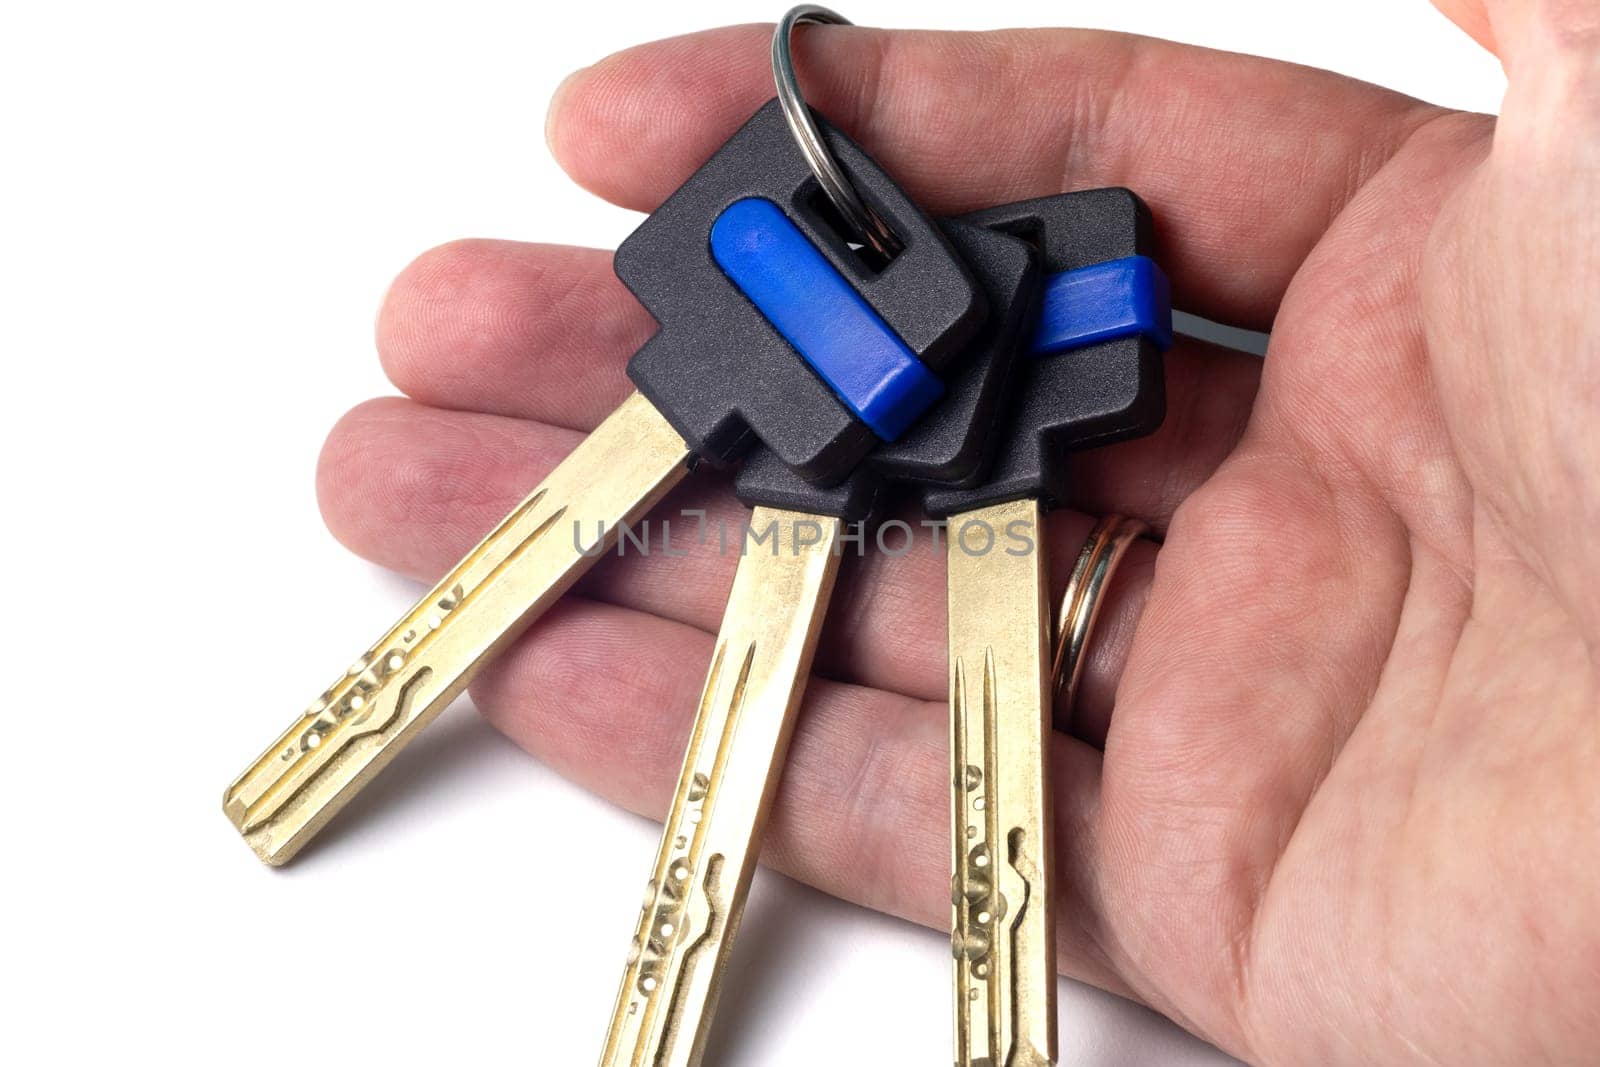 Bunch of modern door keys on the hand palm isolated on a white background. Keys with black plastic head and space for logo or name, close-up view